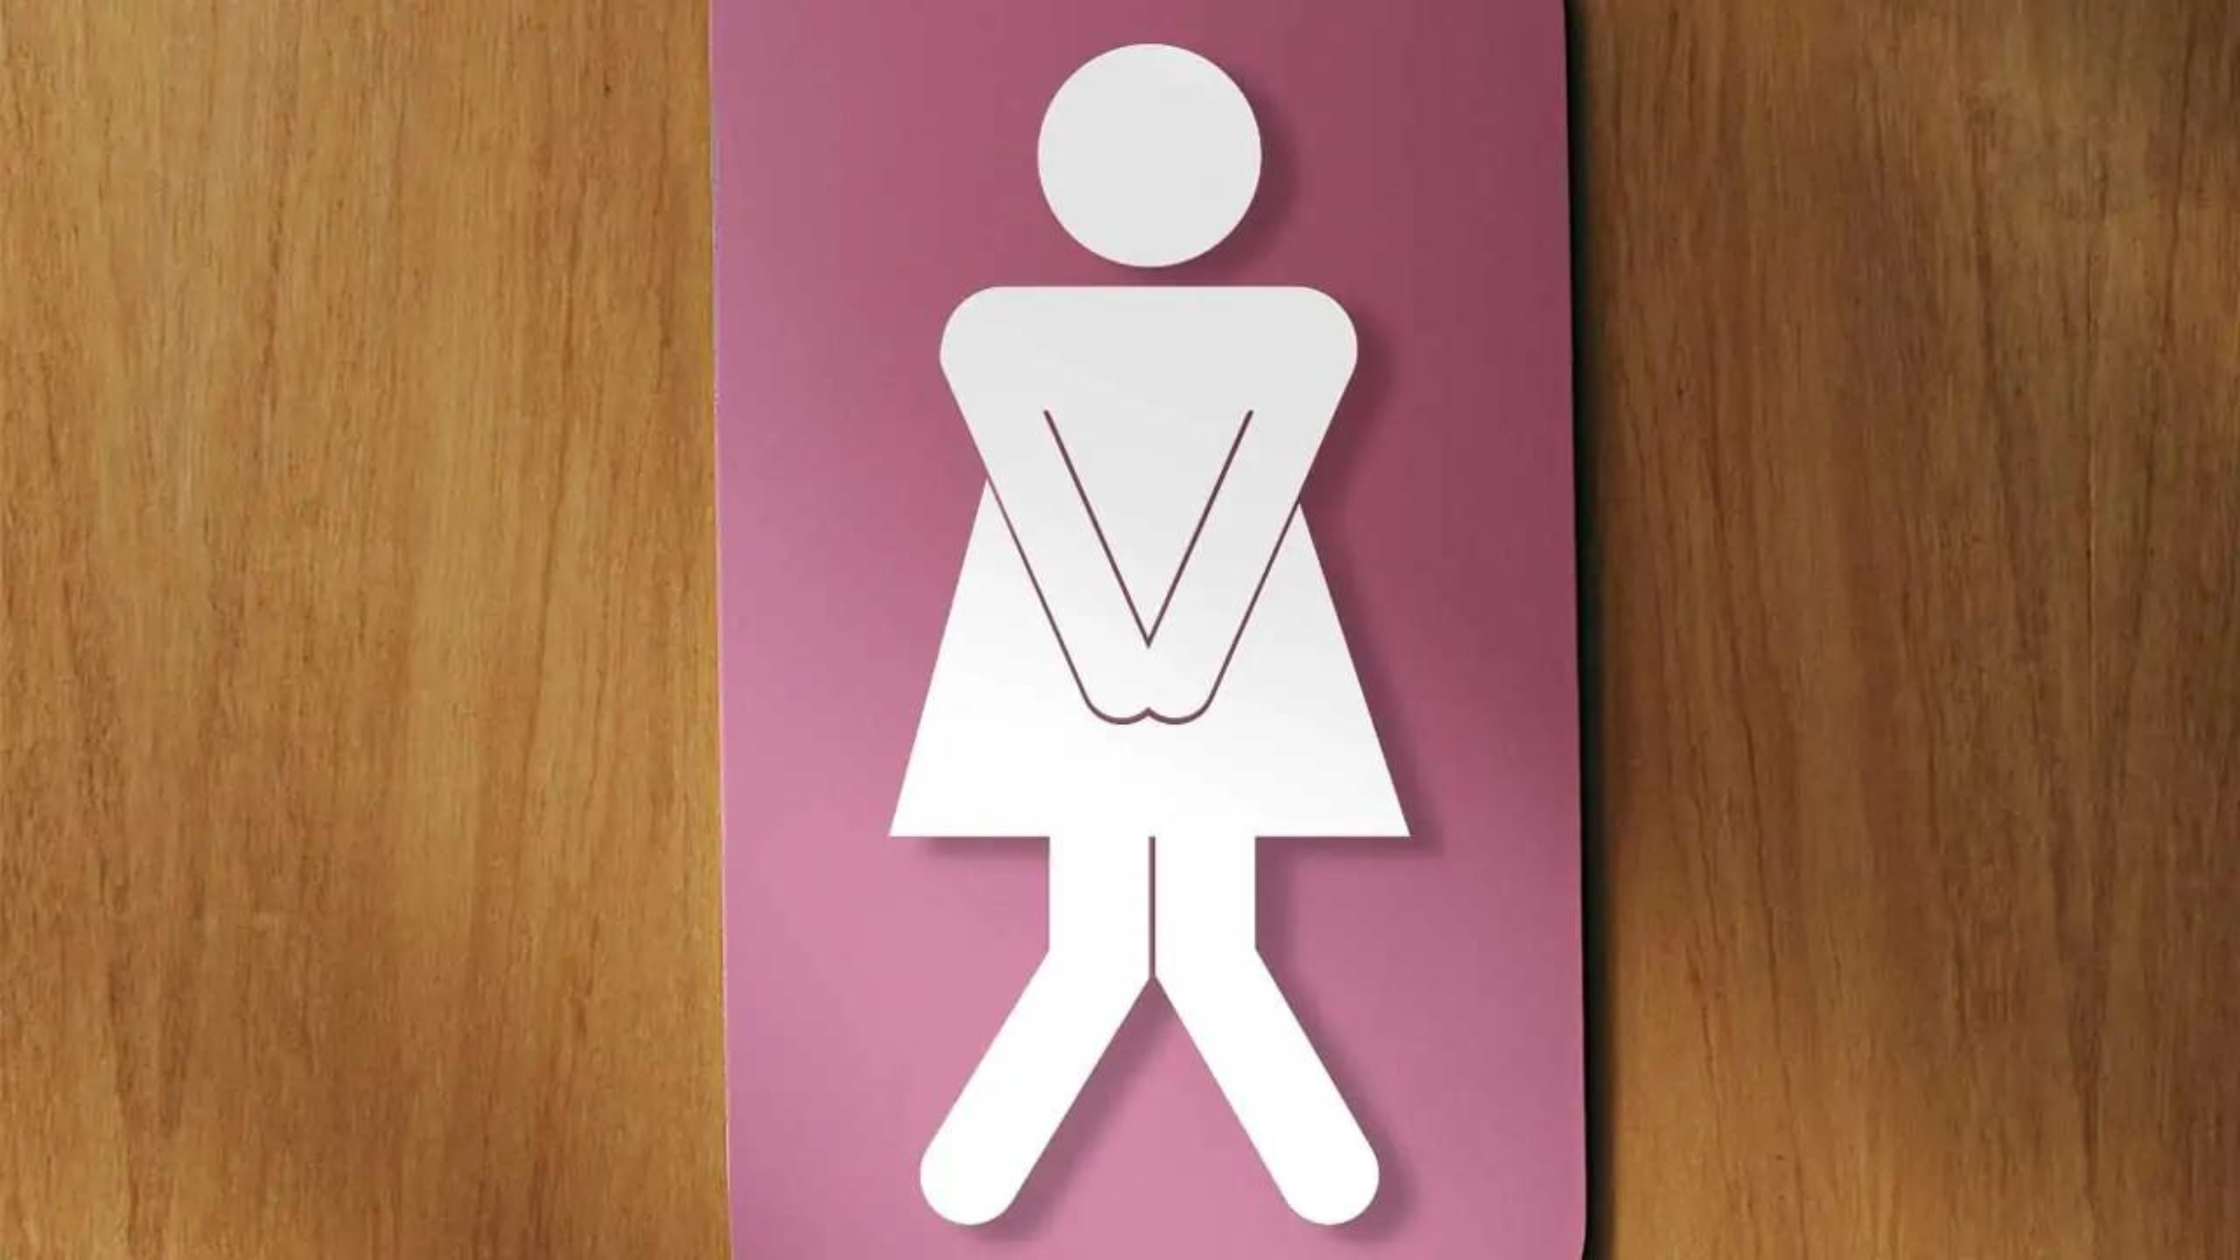 A women's restroom sign that has been modified to show the stick figure woman needing to use the toilet